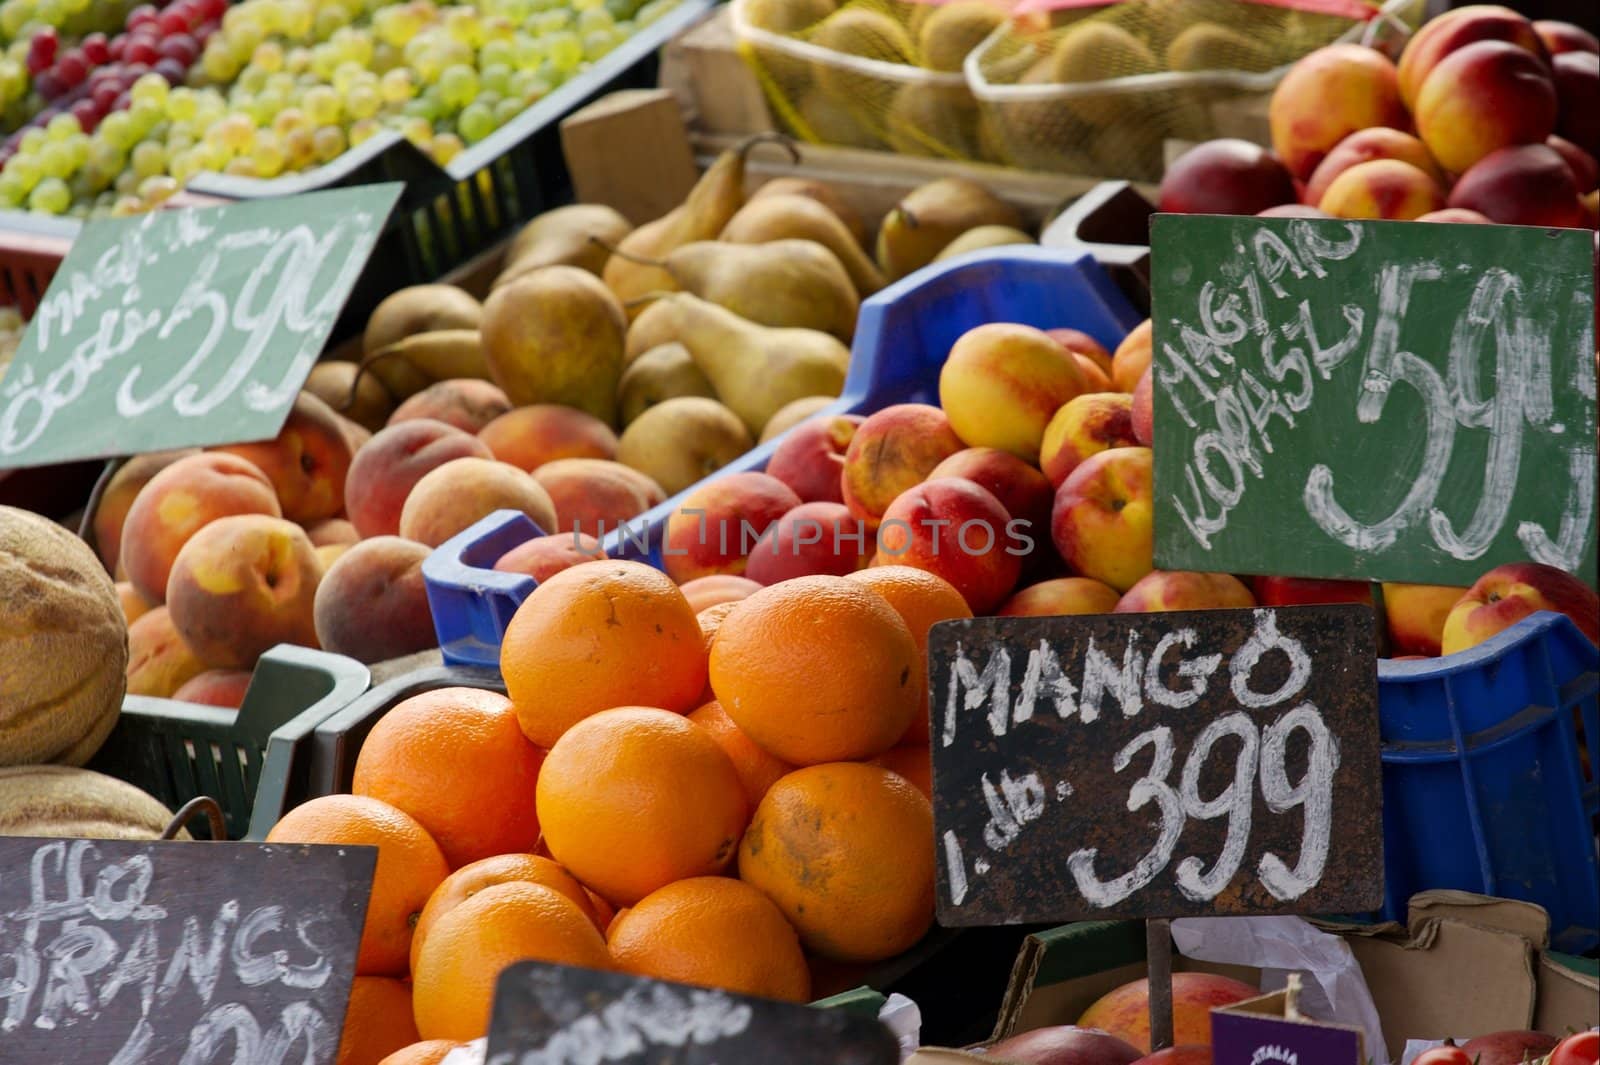 Piles of various fruits at a marketplace